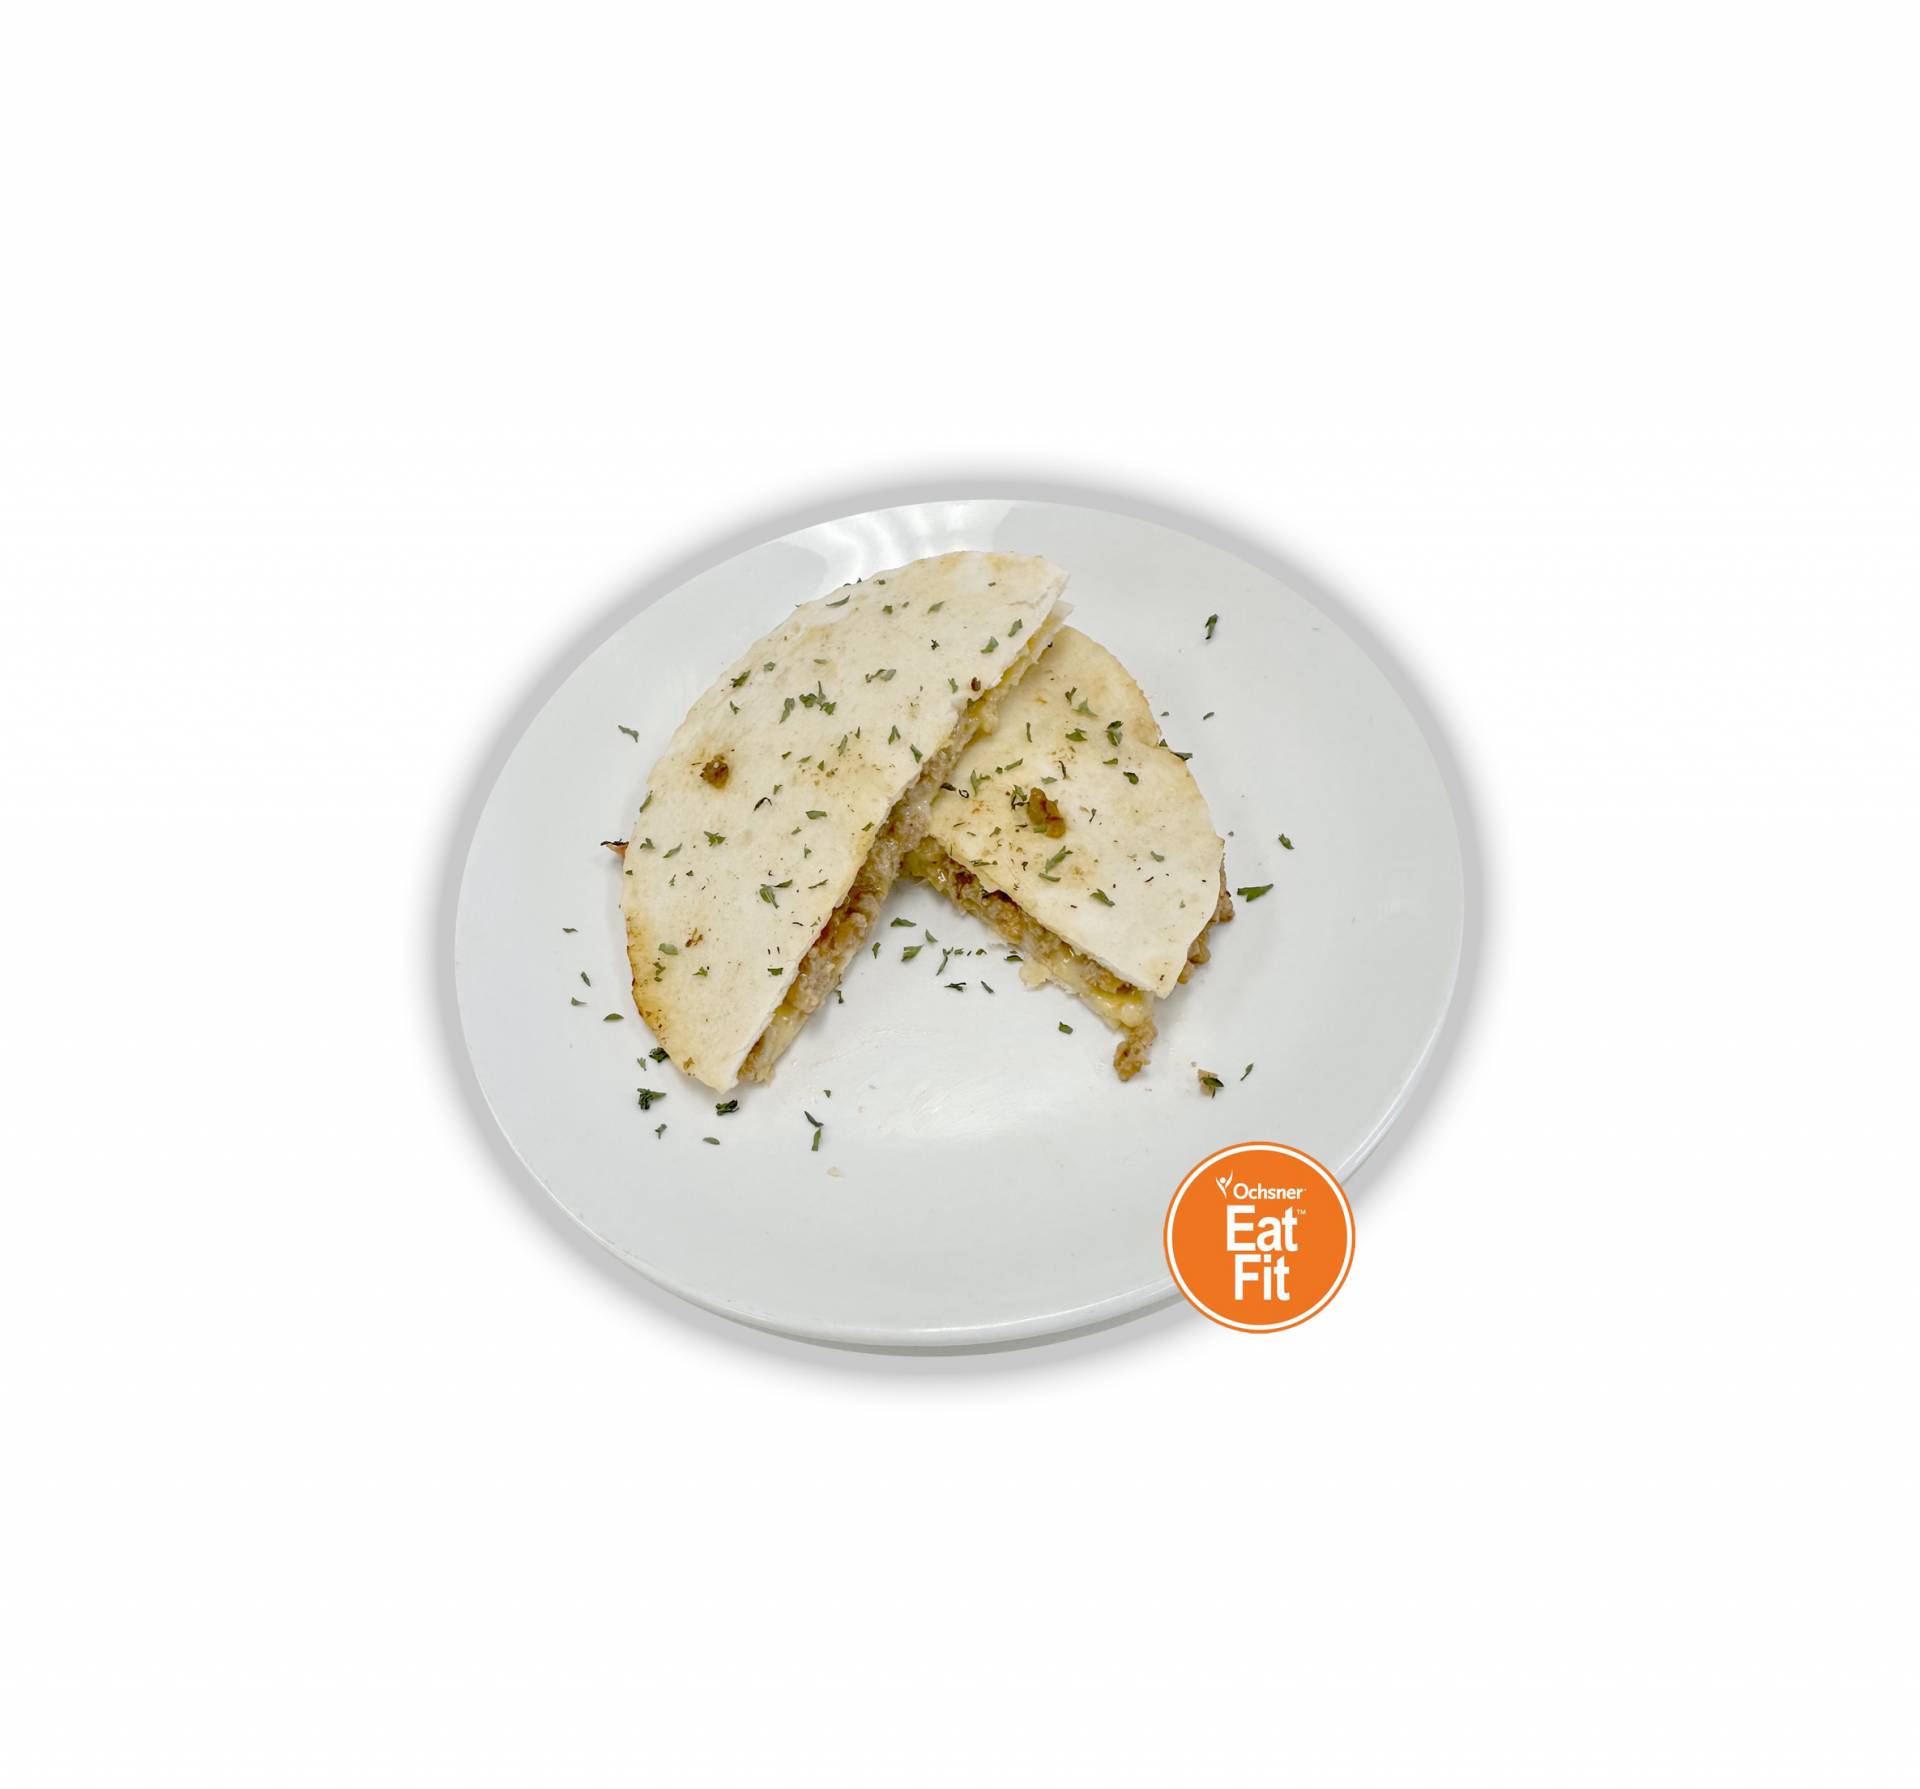 Chicken Quesadilla with Sour Cream and Salsa Packets - Low Carb